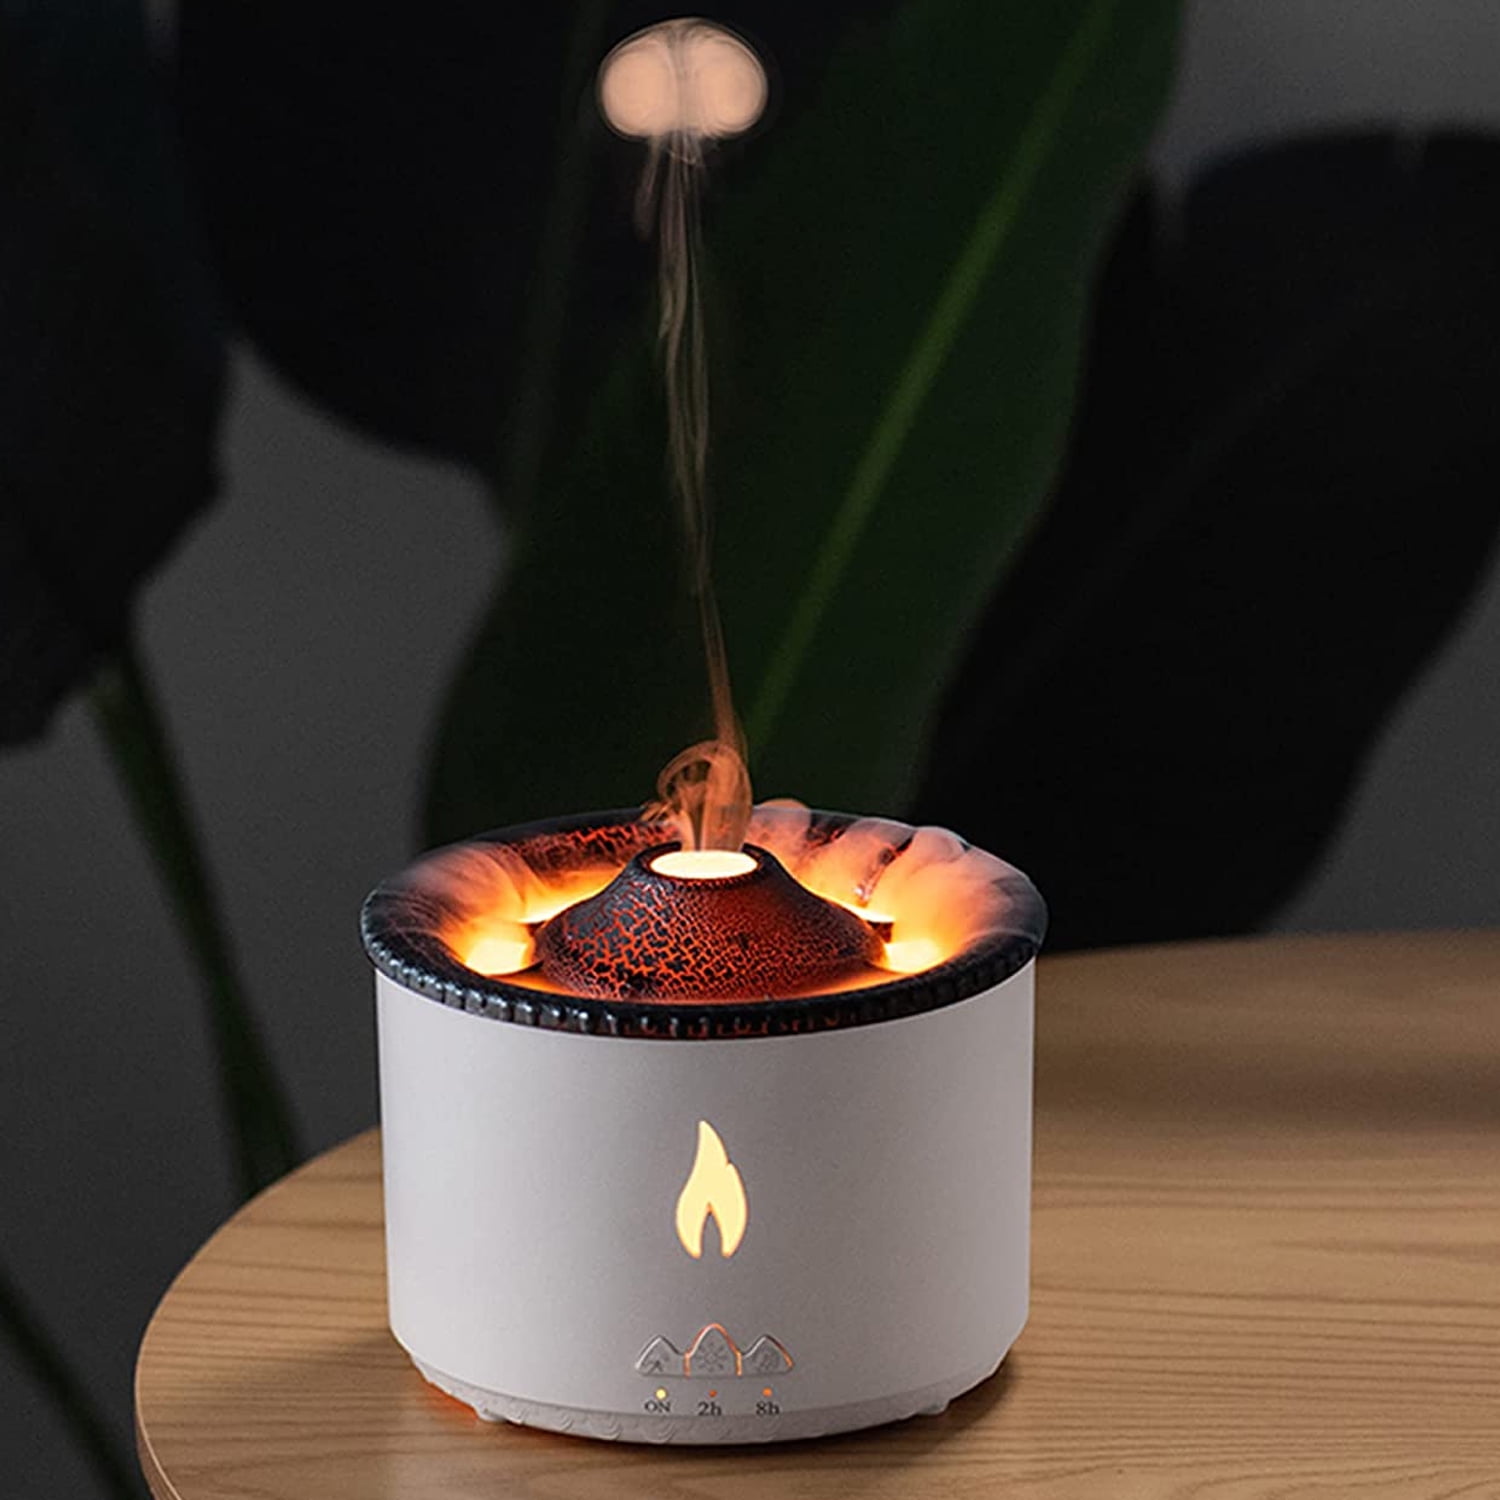  Cechlicht Volcano Diffuser, Essential Oil Diffuser 300ml Volcano  Humidifier with Flame & Volcano Mist Mode, 2 Colors, Timer, Auto Shut-Off,  Remote Control, Flame Diffusers for Home Bedroom Black : Health 